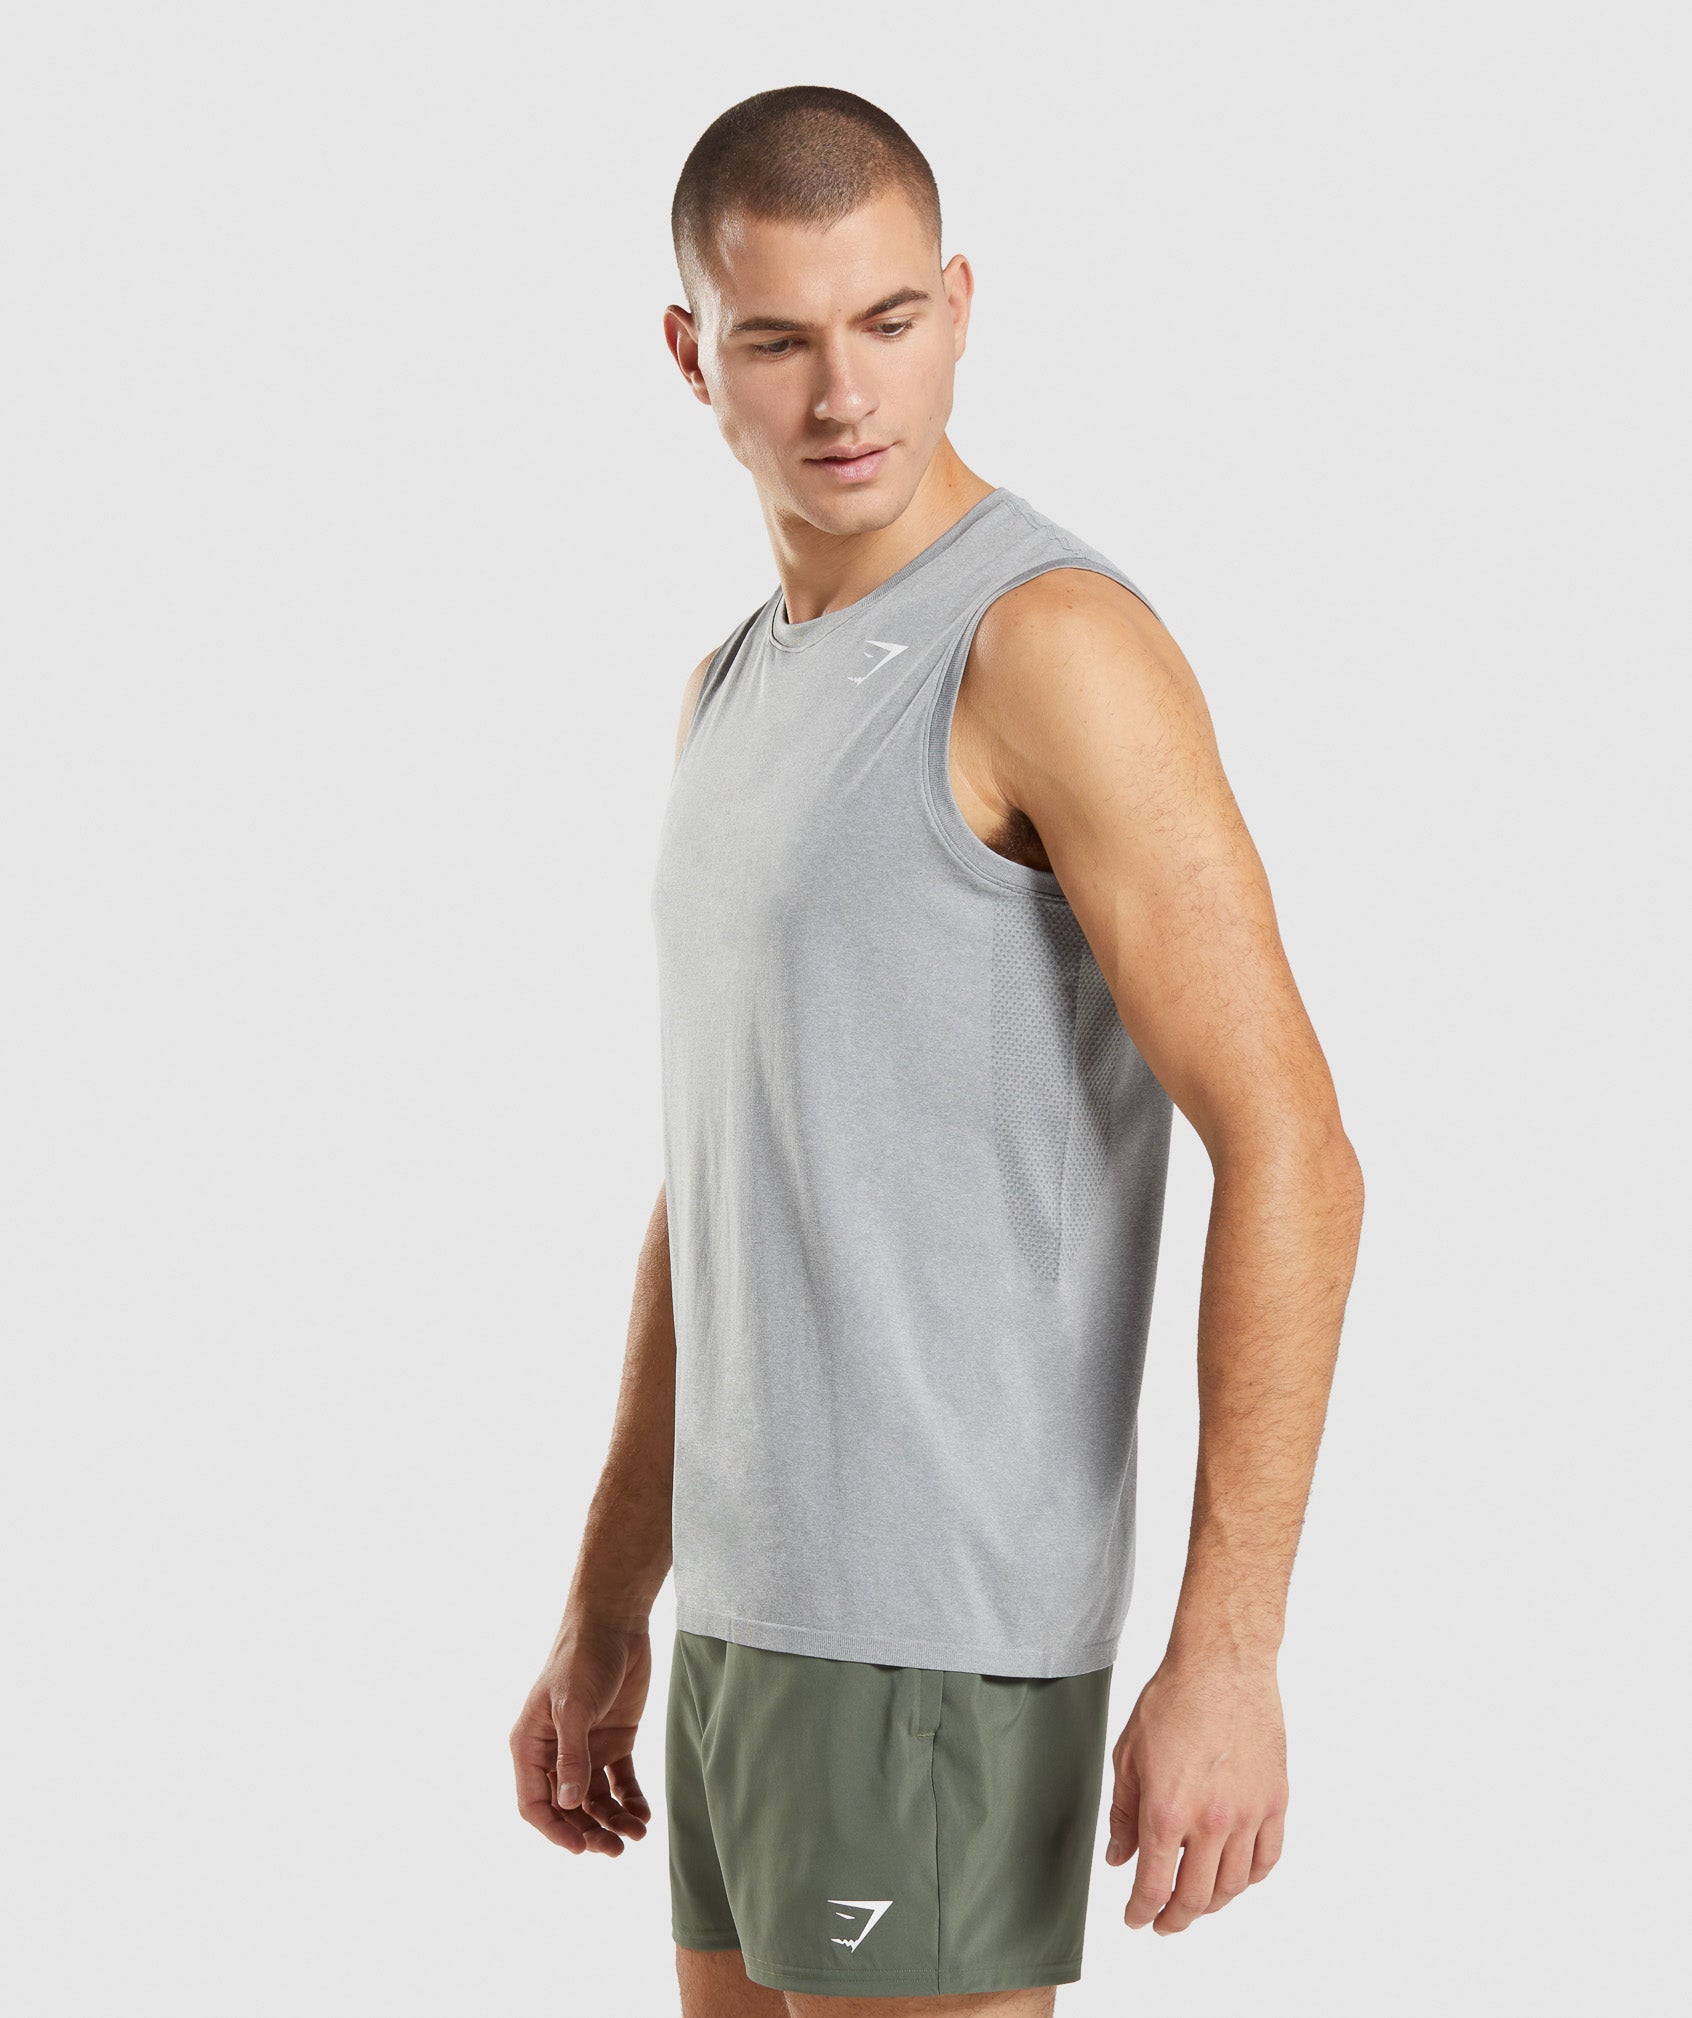 Arrival Seamless Tank in Grey - view 3